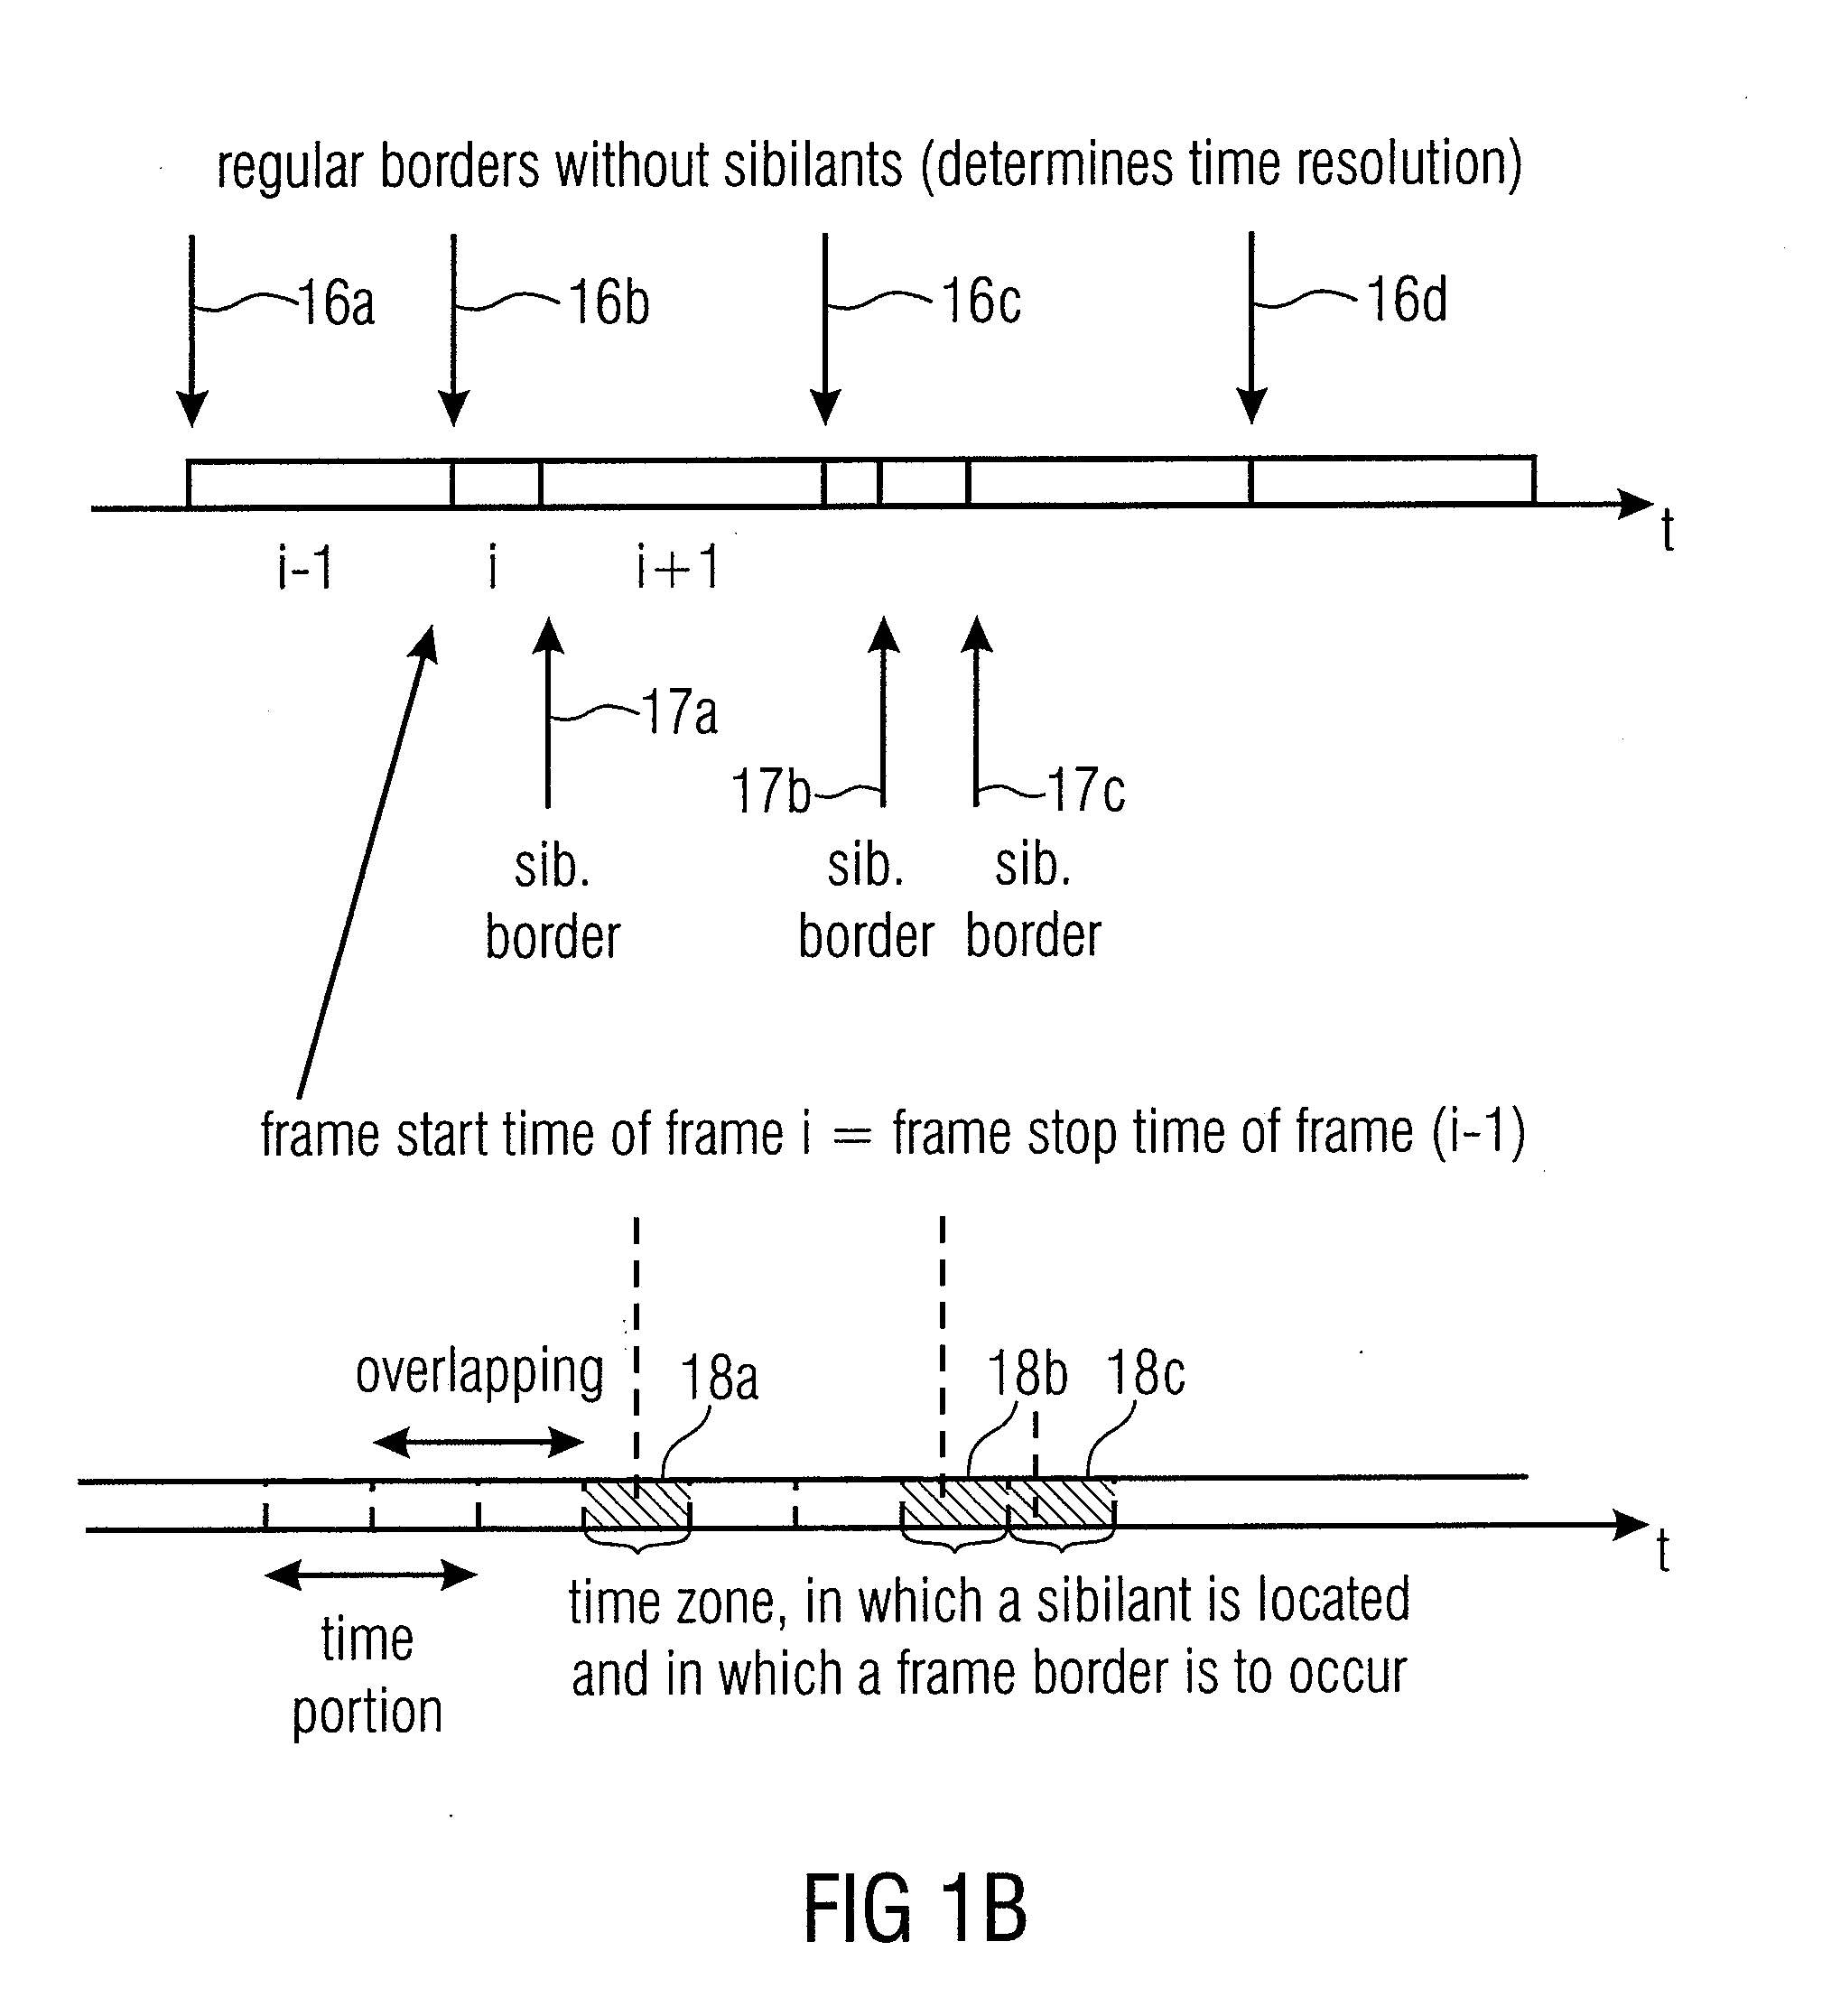 Apparatus and method for calculating bandwidth extension data using a spectral tilt controlled framing